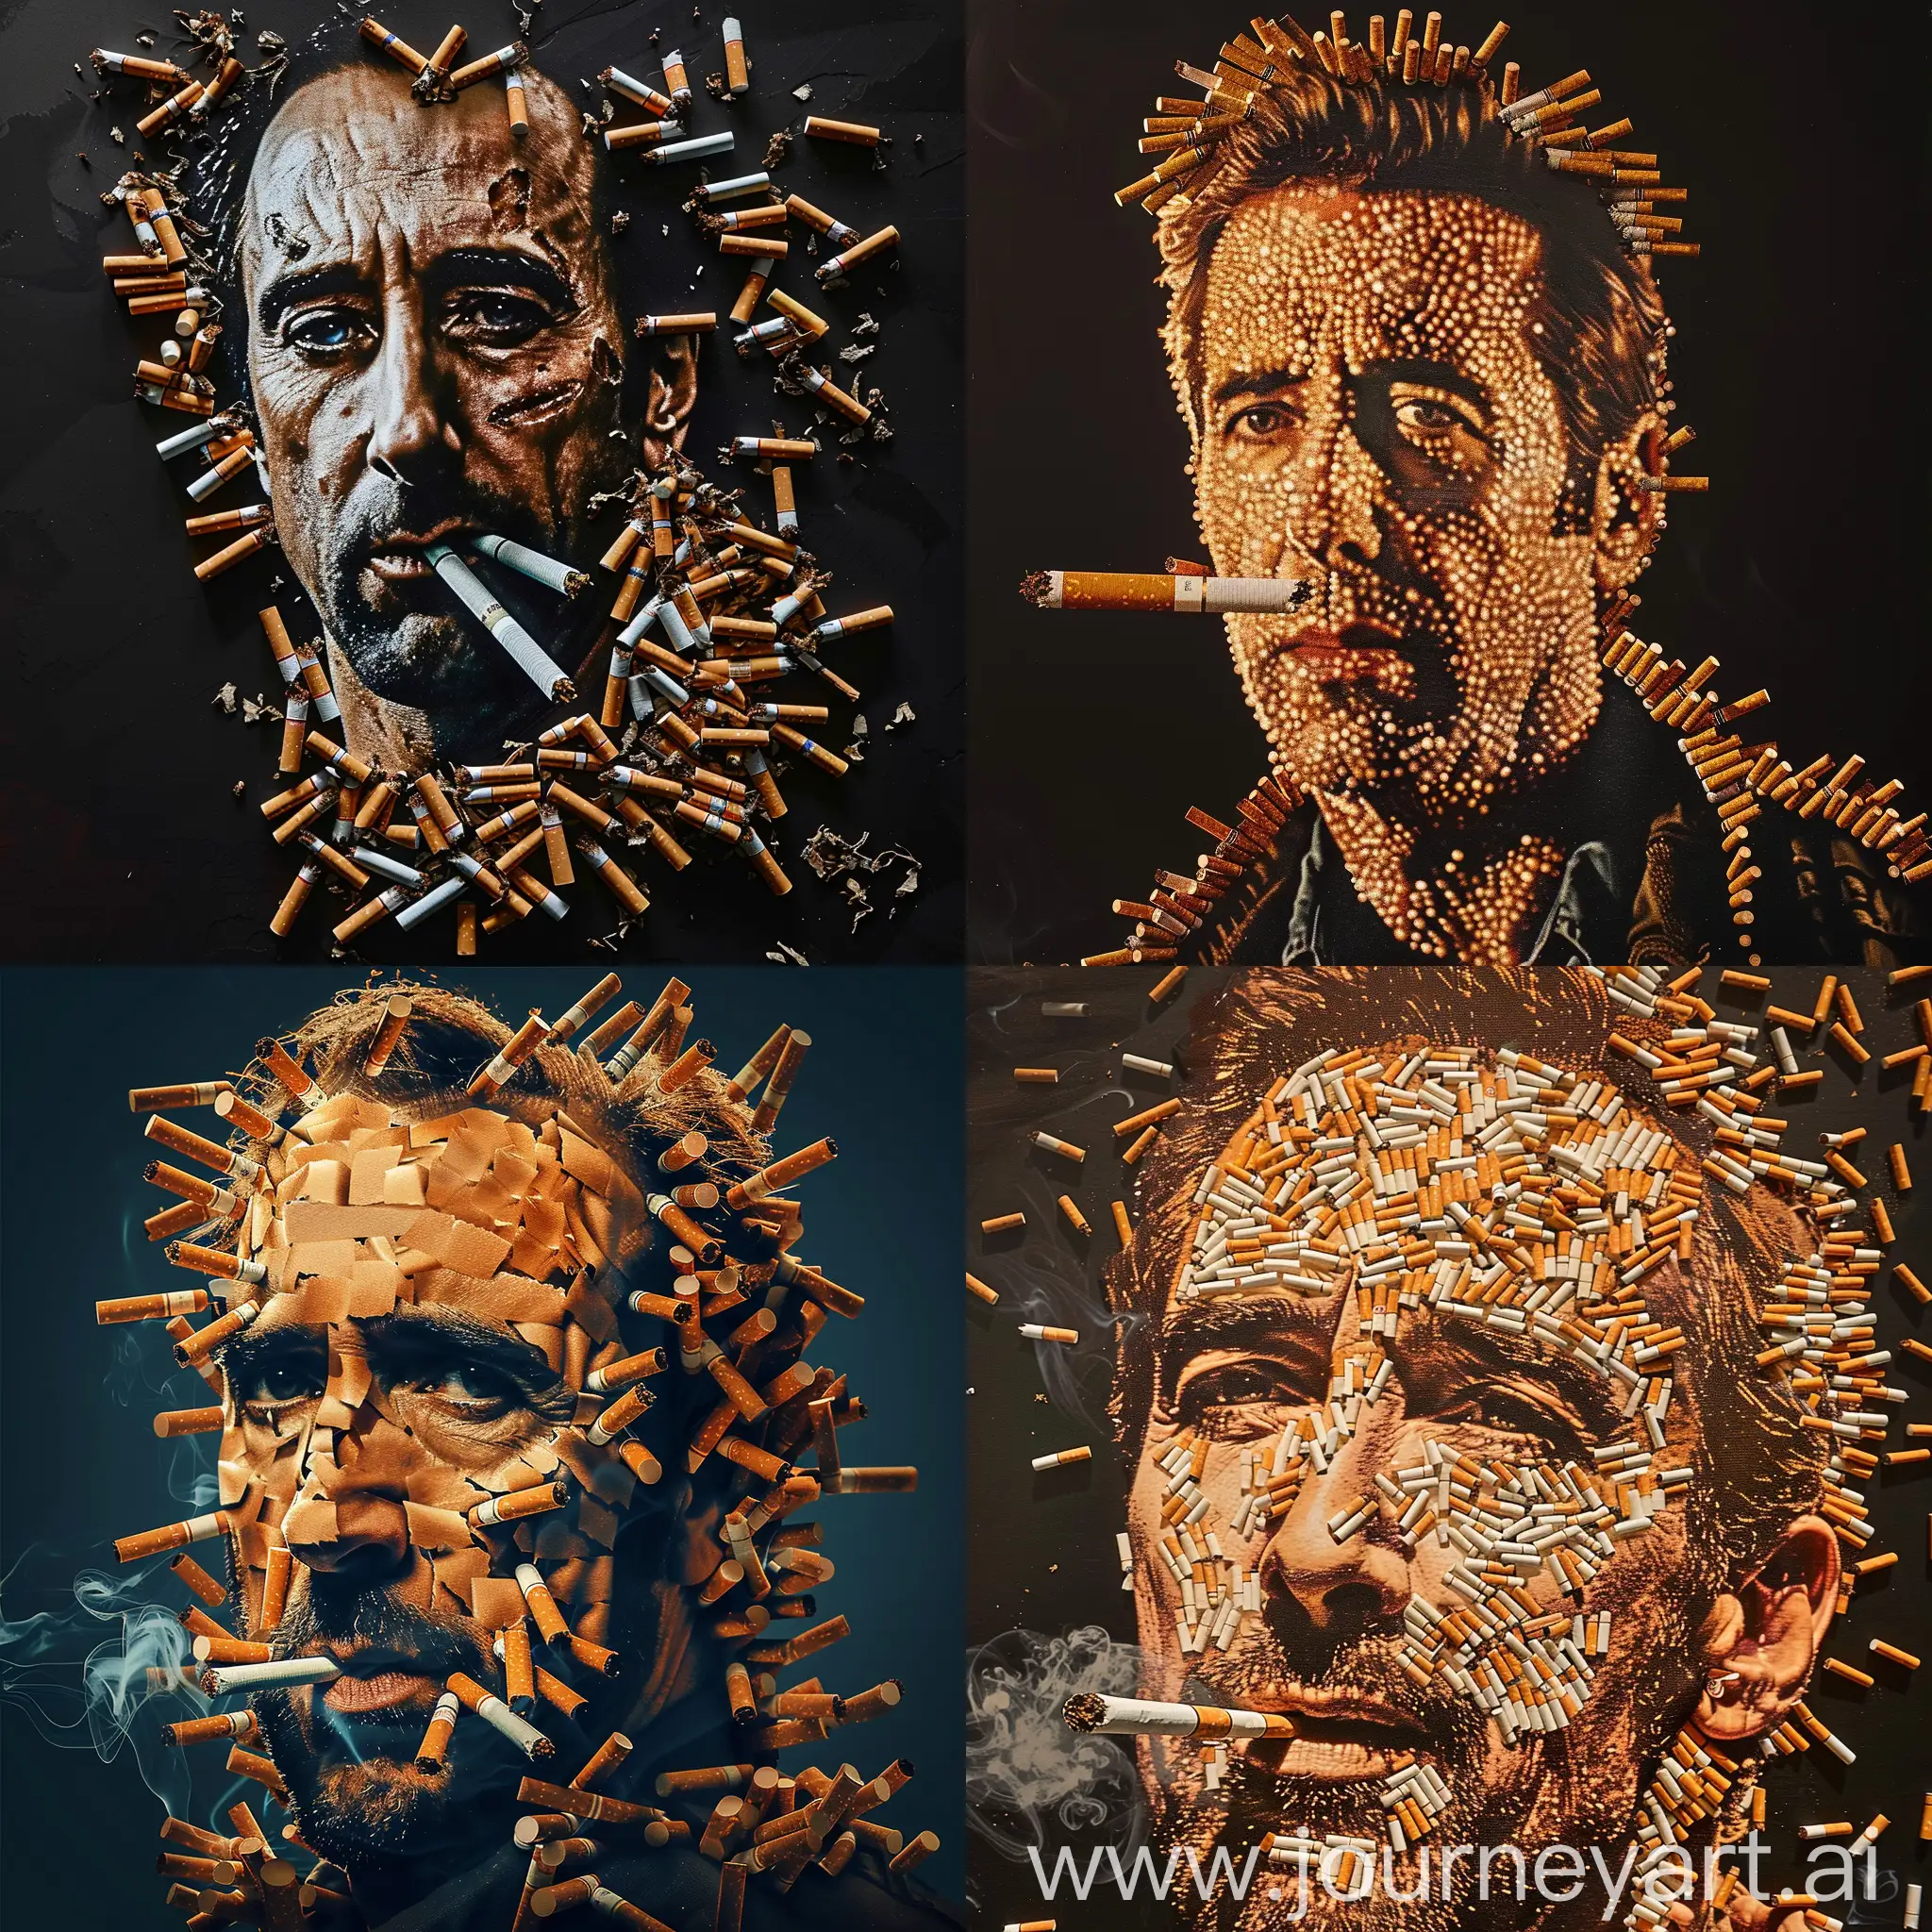 generate a photorealist image of nicholas cage made out of cigarettes like int lord of war movie poster